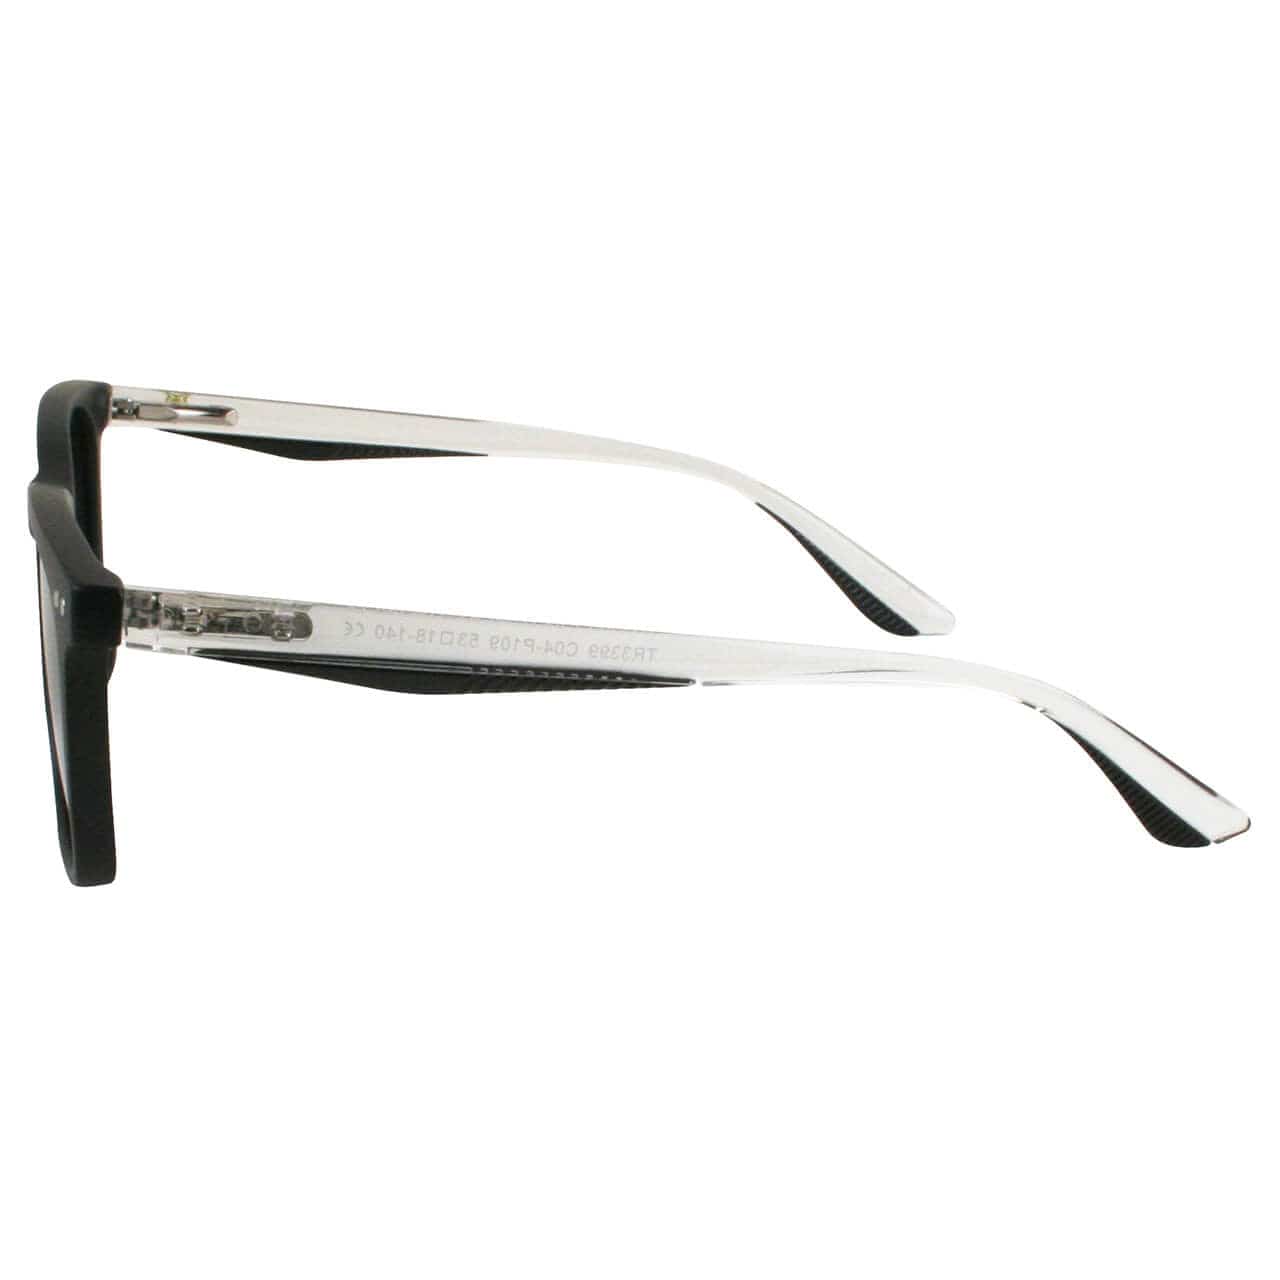 Solect Navigator Sunglasses with Black Frame and Gray Polarized Lenses Side View